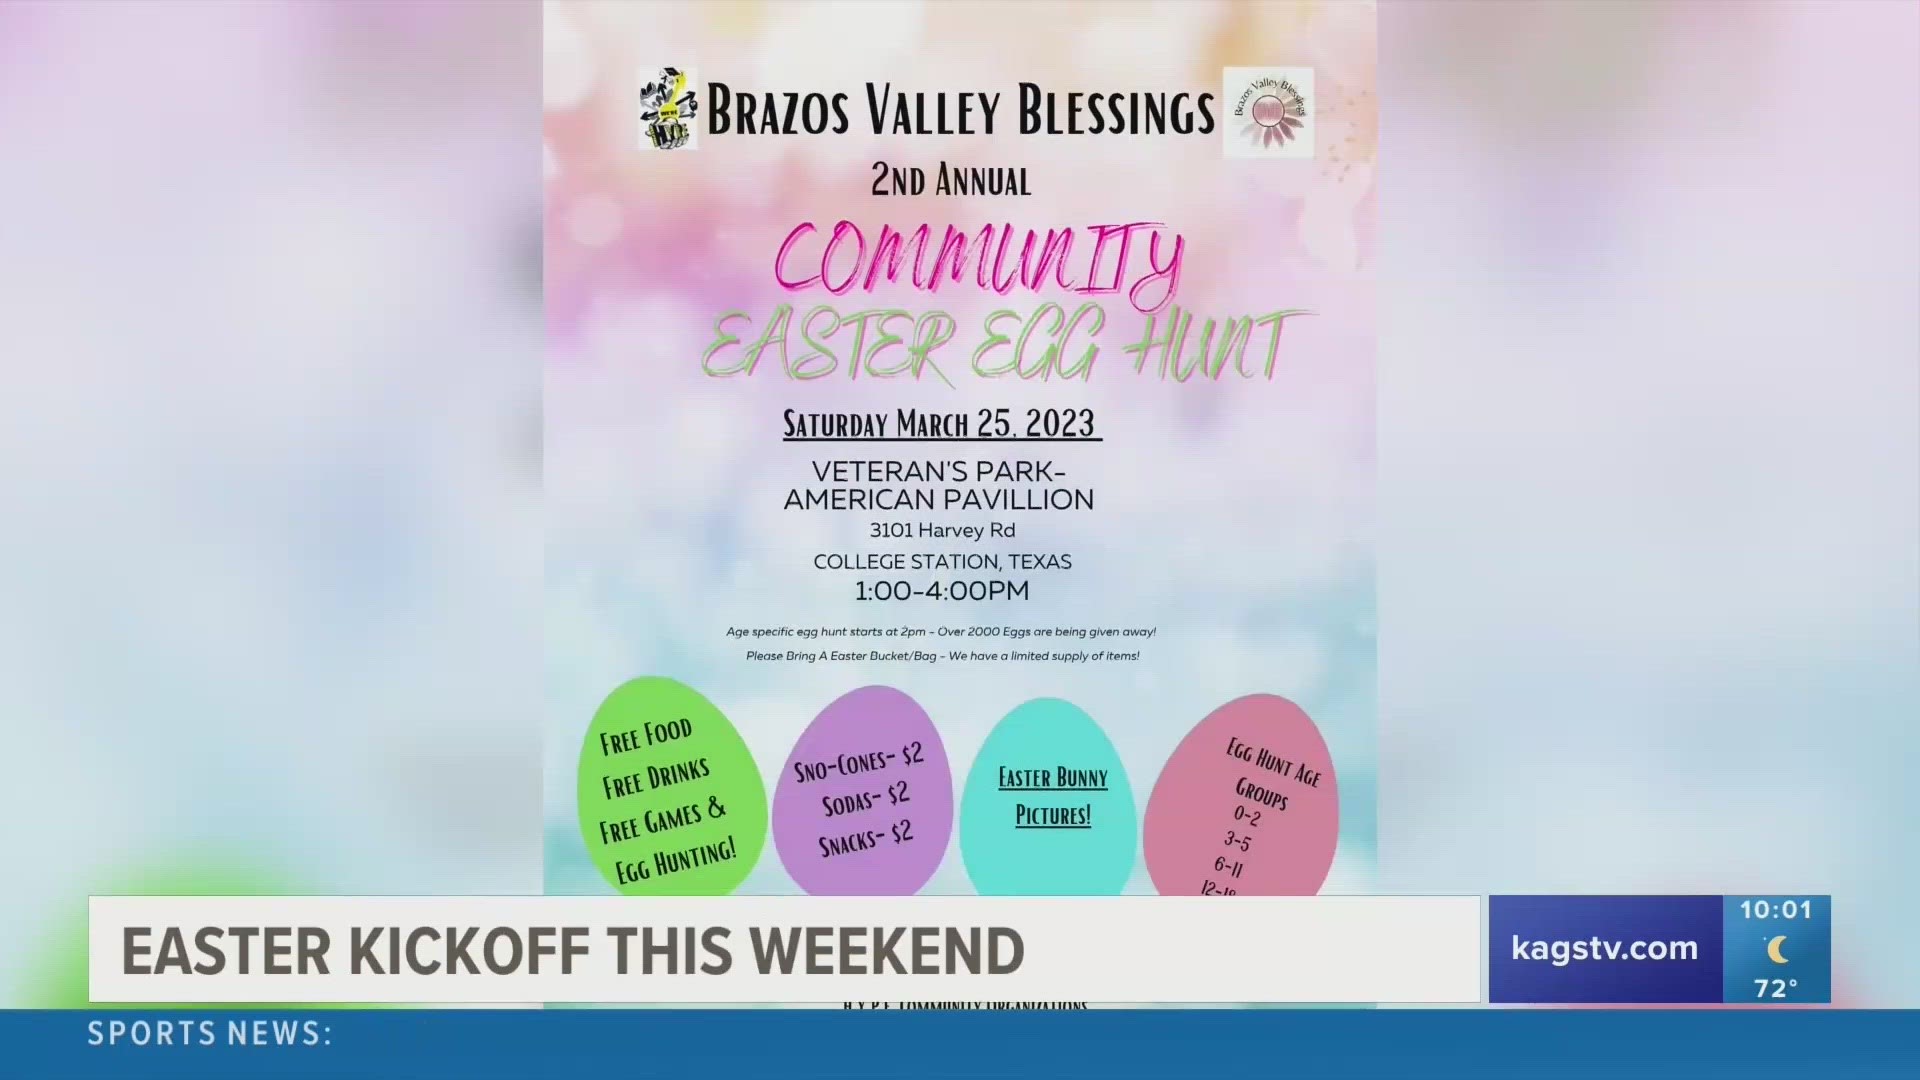 Brazos Valley Blessings has been making a splash in BCS by helping families, kicking off their springtime activities with an Easter egg hunt.